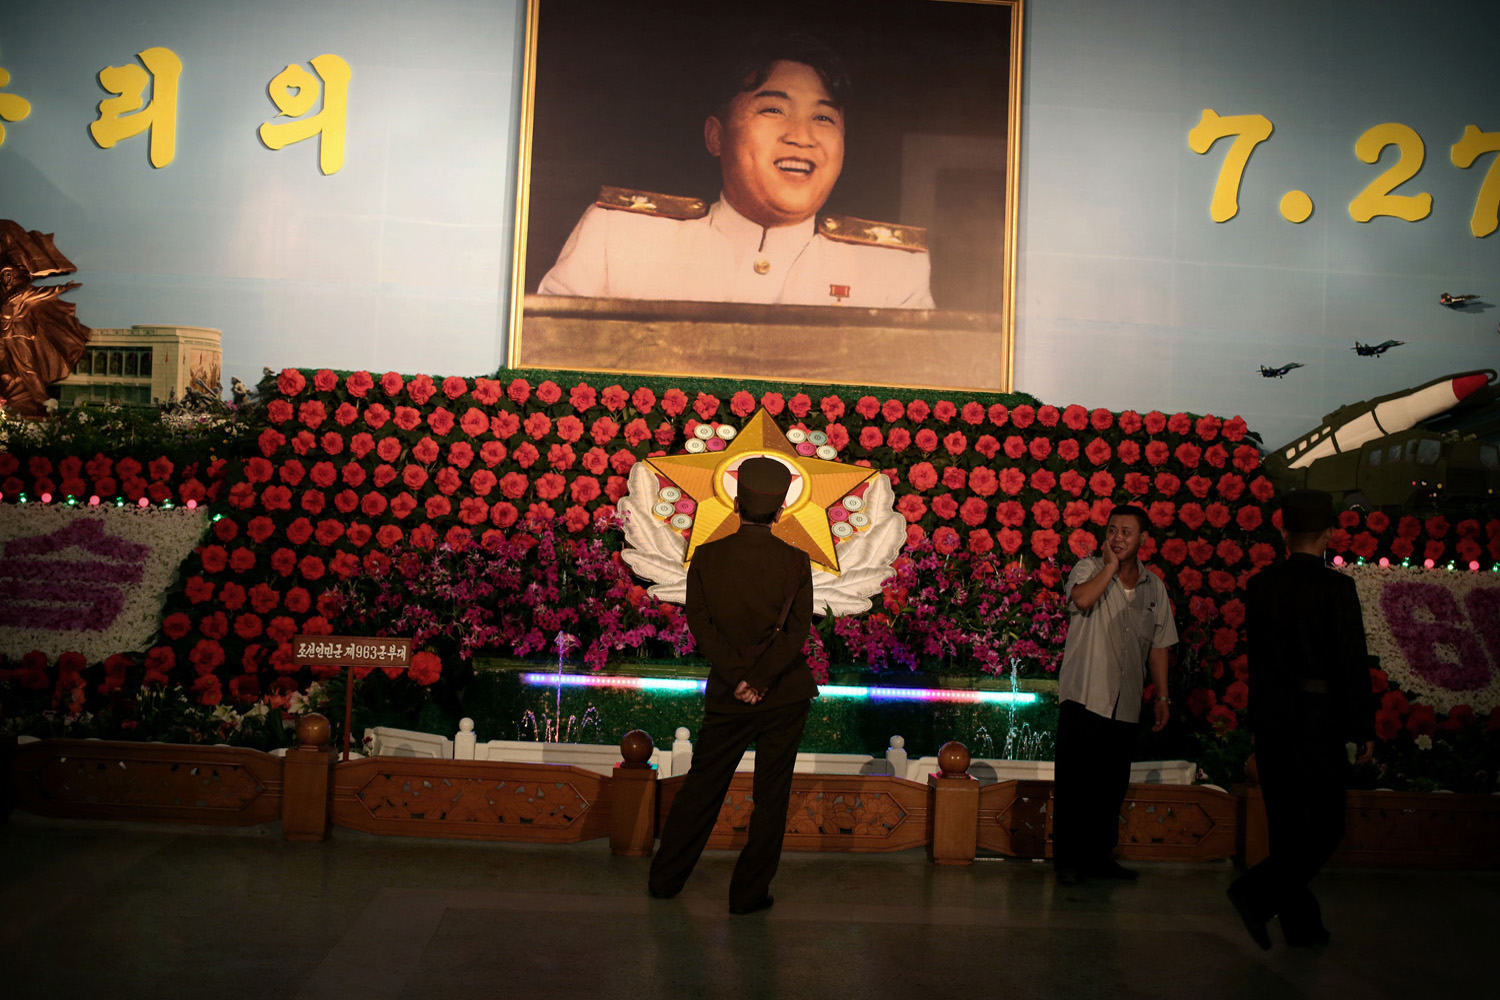 A soldier looks at flowers, named Kimjongilia and Kimilsungia after Kim Jong Il and Kim Il Sung, respectively, which are on display in Pyongyang, Jul. 24, 2013.